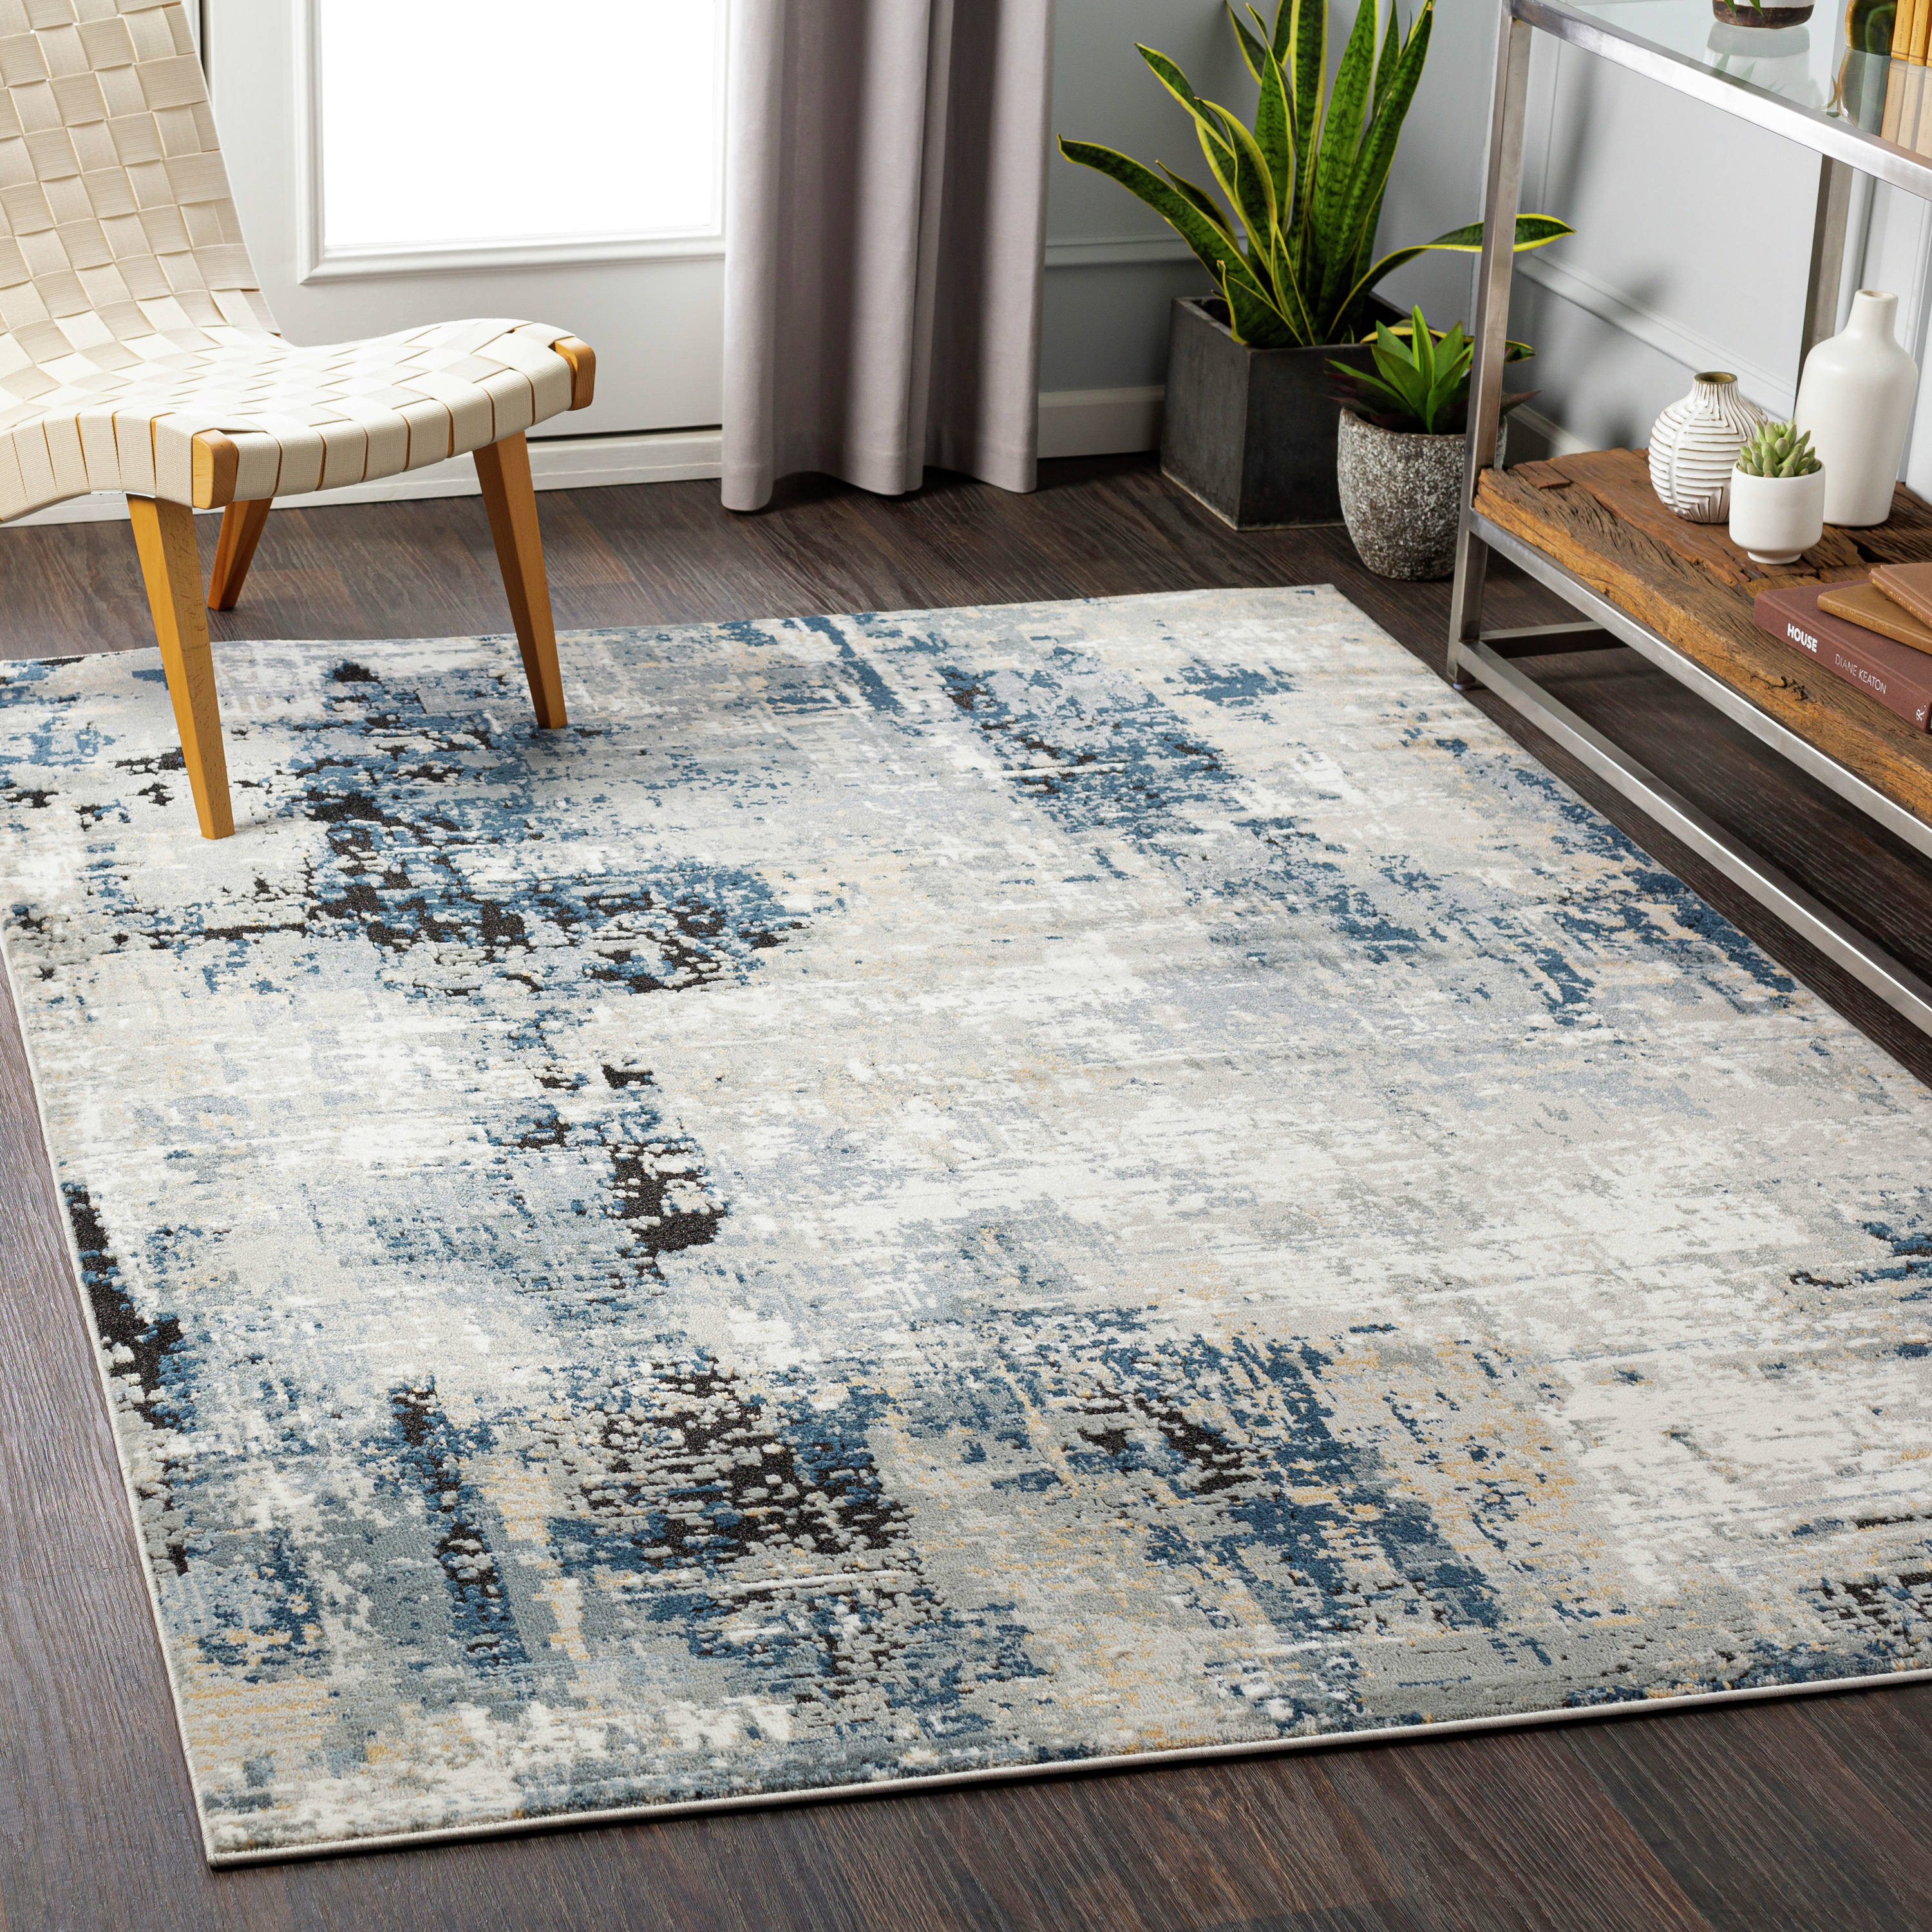 Joaquin Bath Rug Sand & Stable Color: Navy, Size: 20 W x 32 L